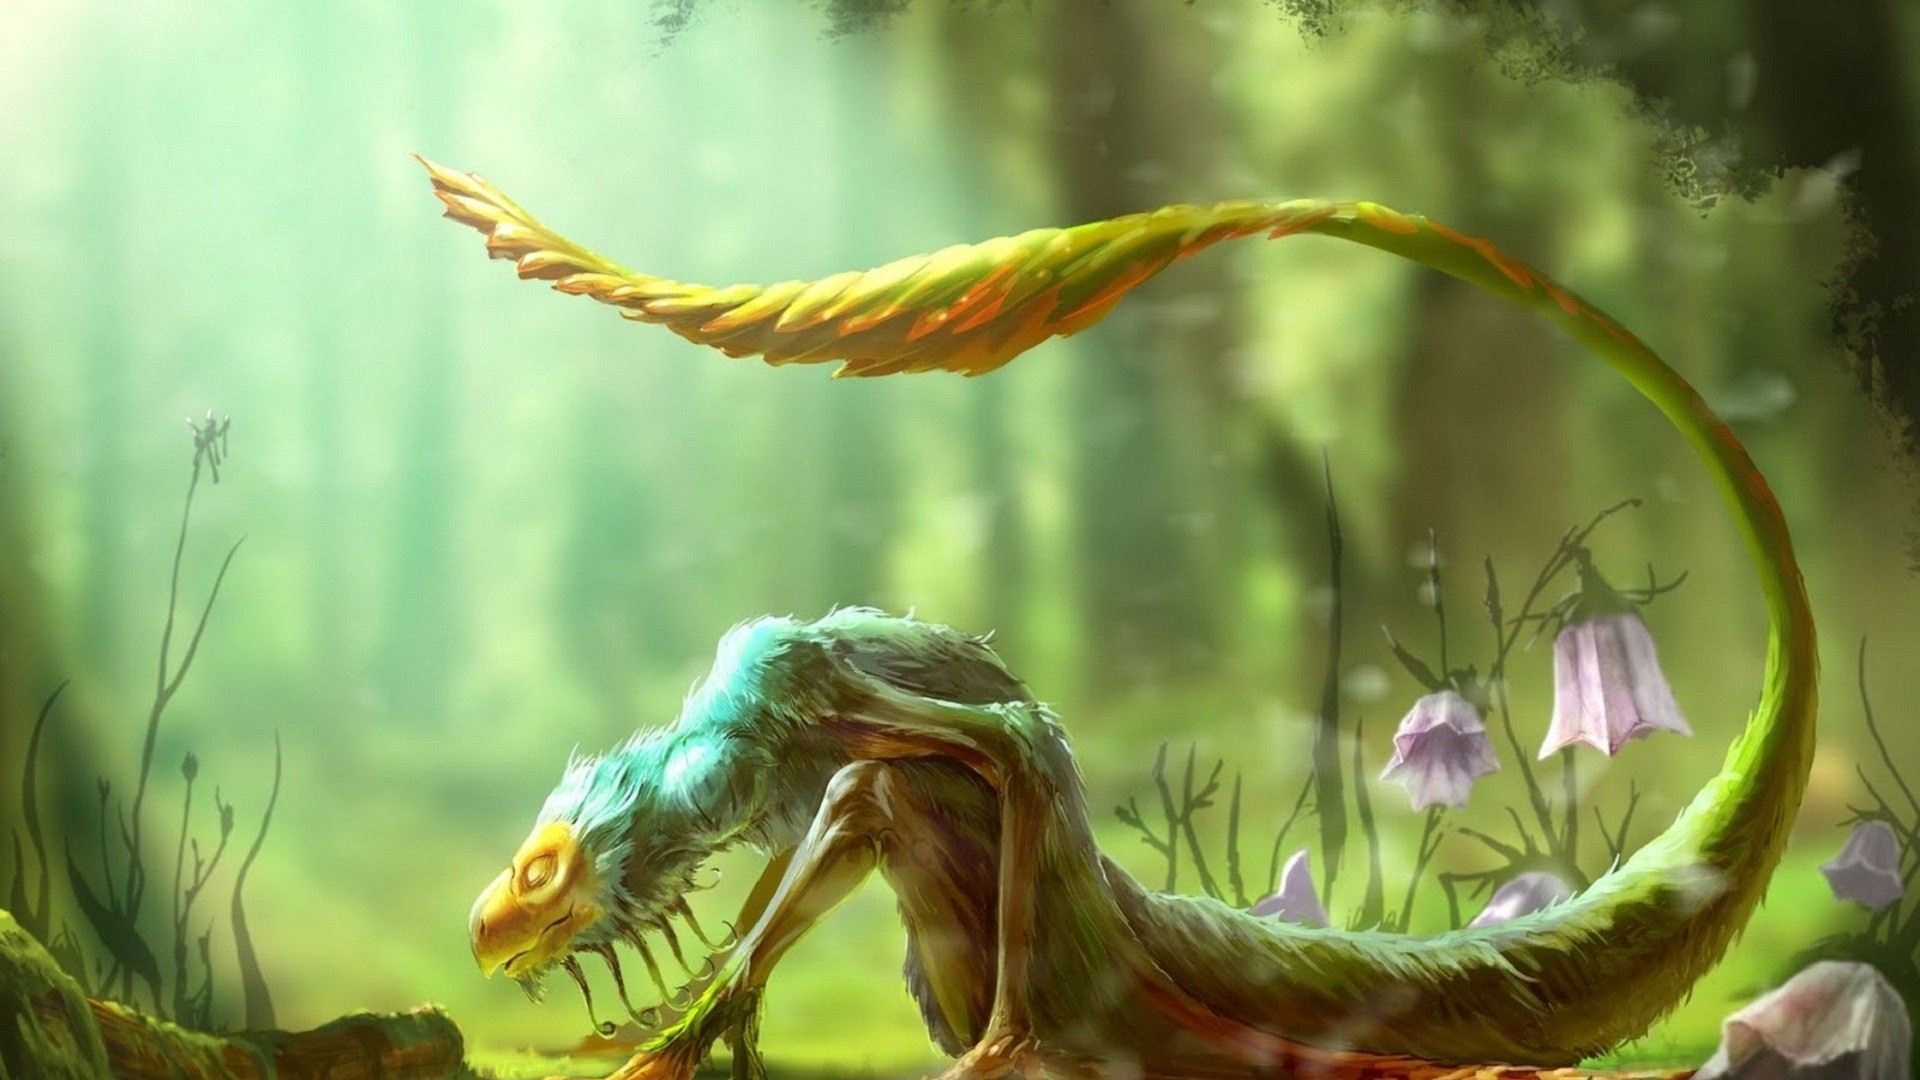 Dragon Painting Wallpaper - Animals Live In The Forest Floor - HD Wallpaper 